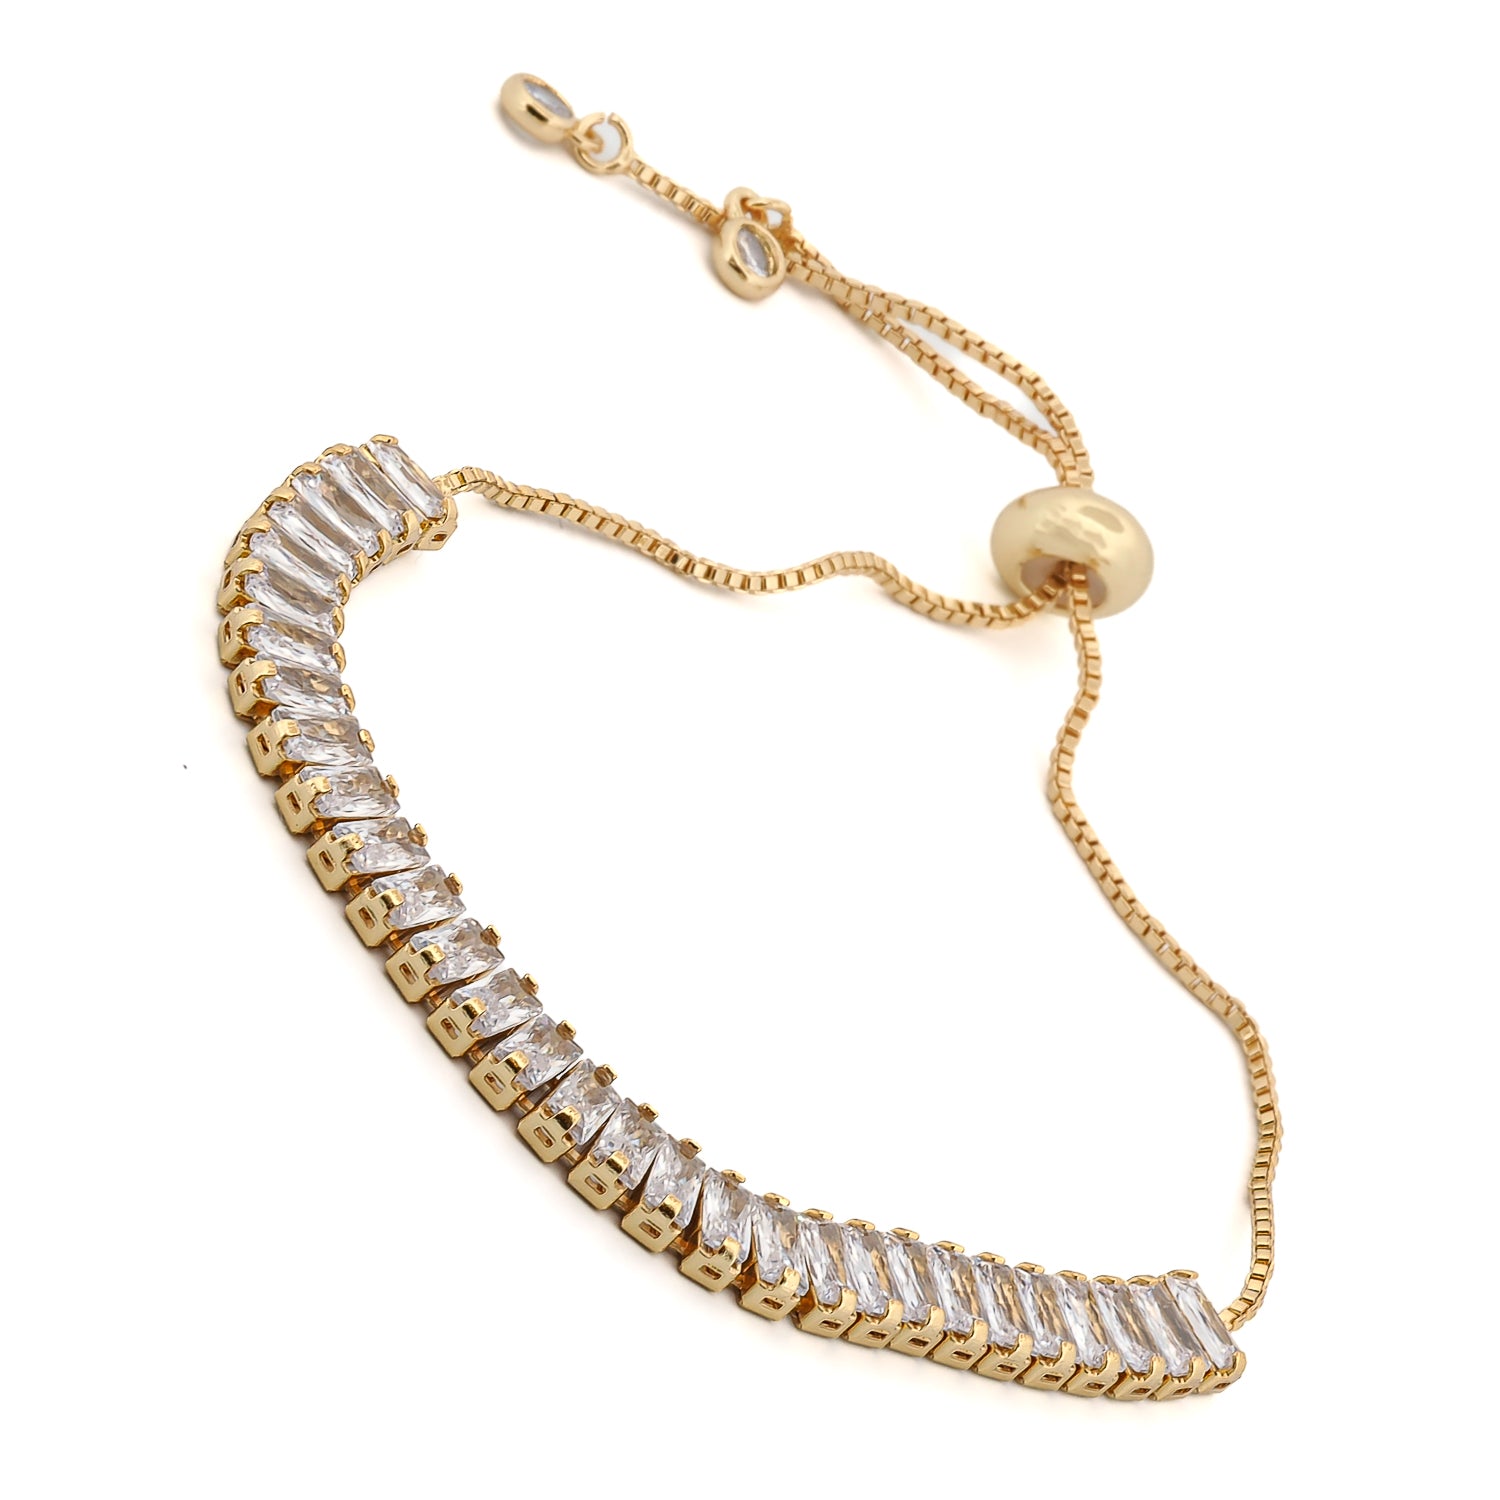 Shimmering Style: Gold and Baguette Diamond Fashion Accessory